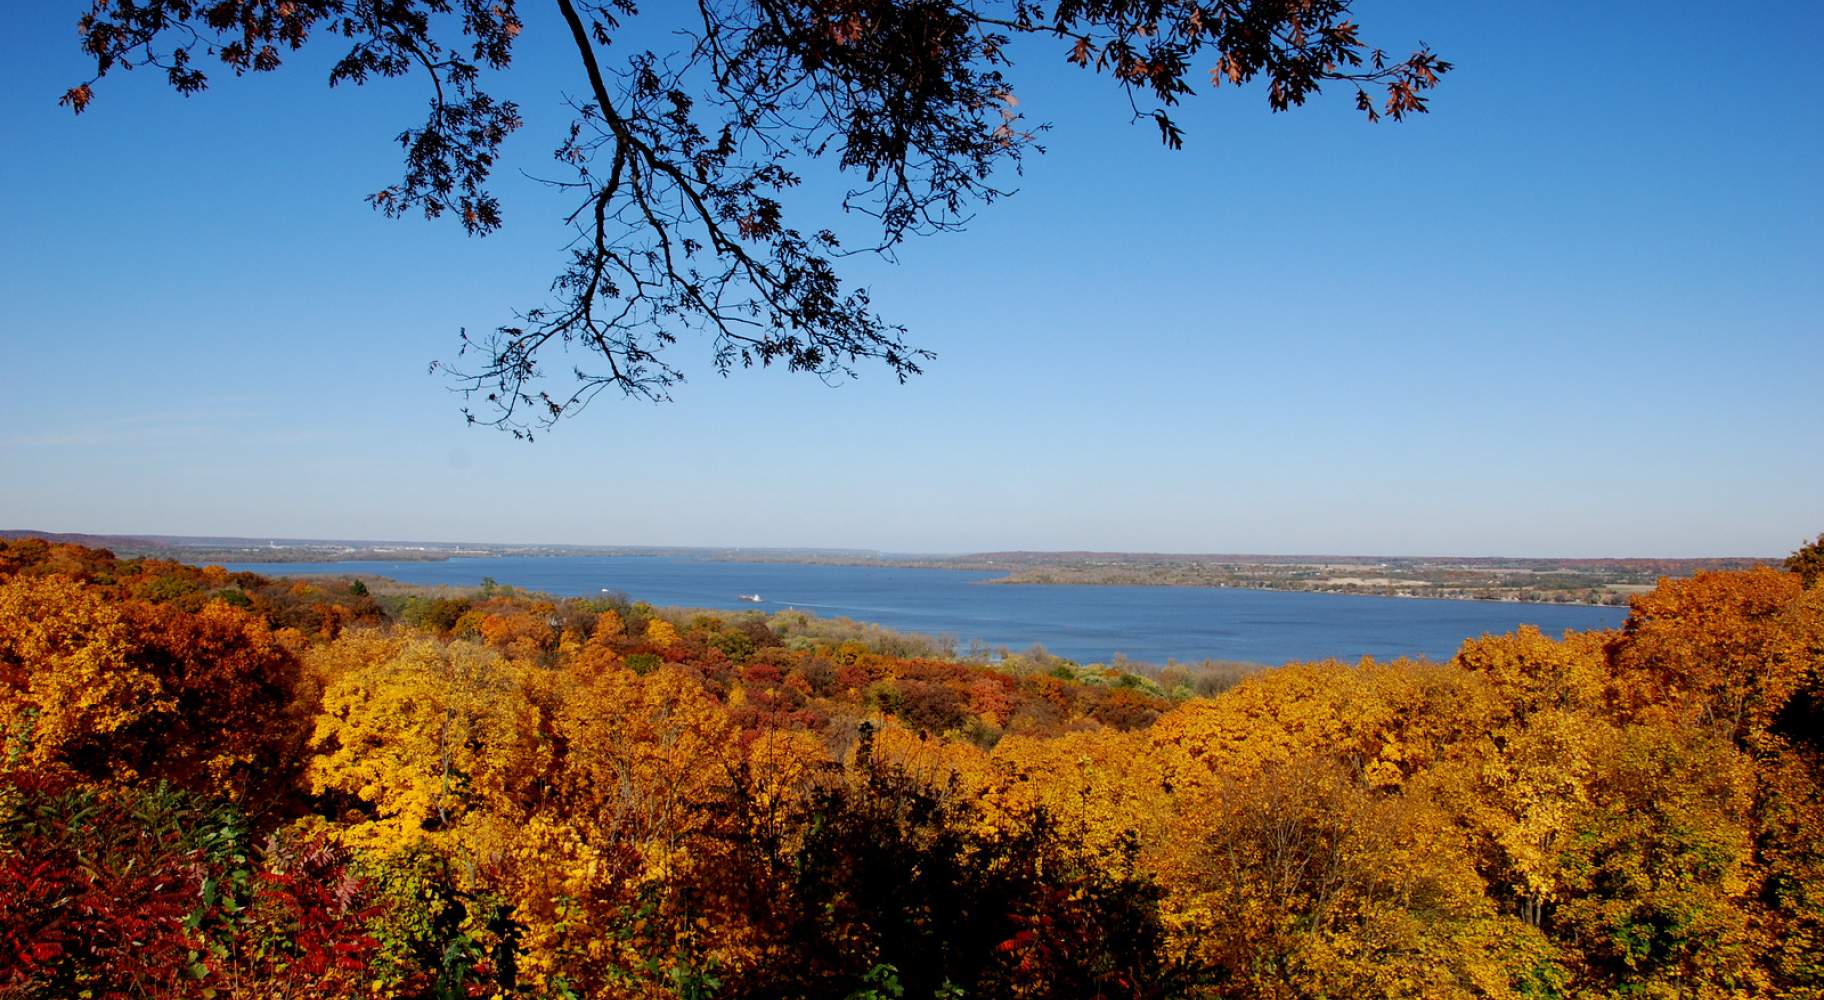 A viewpoint over a forest with fall colors looking towards Peoria Lake 